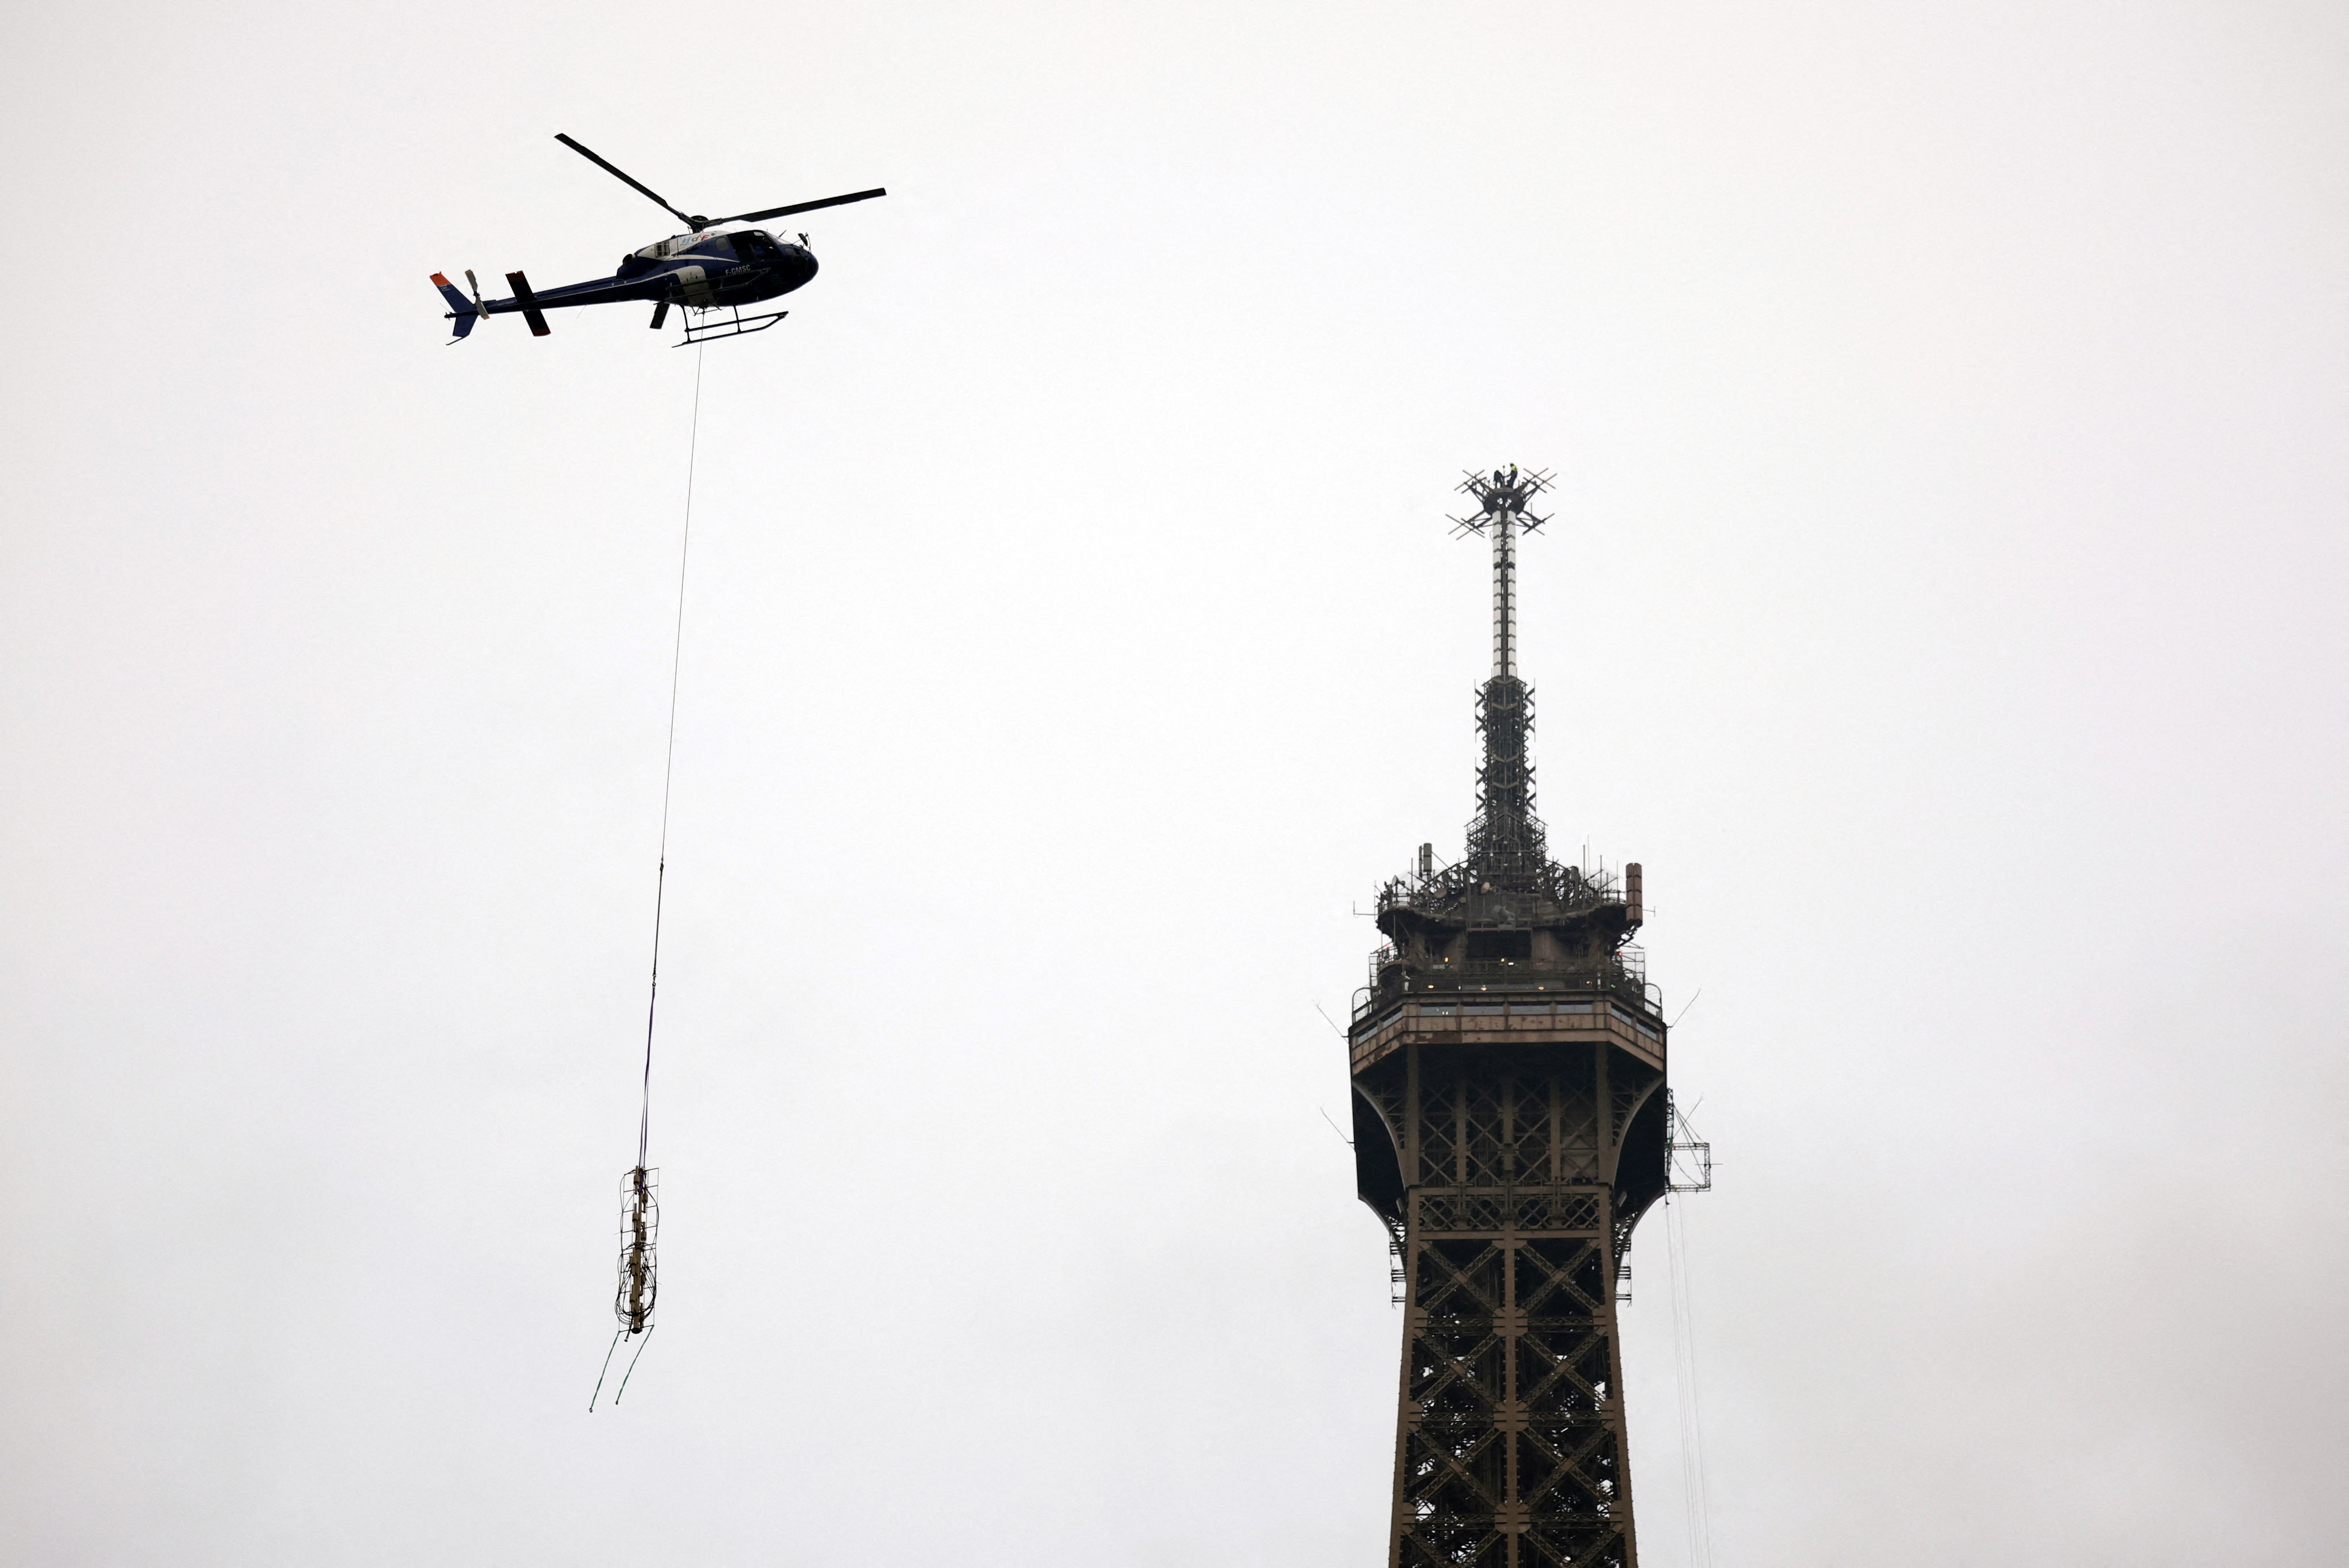 Installation of a new telecom transmission antenna on the Eiffel Tower in Paris